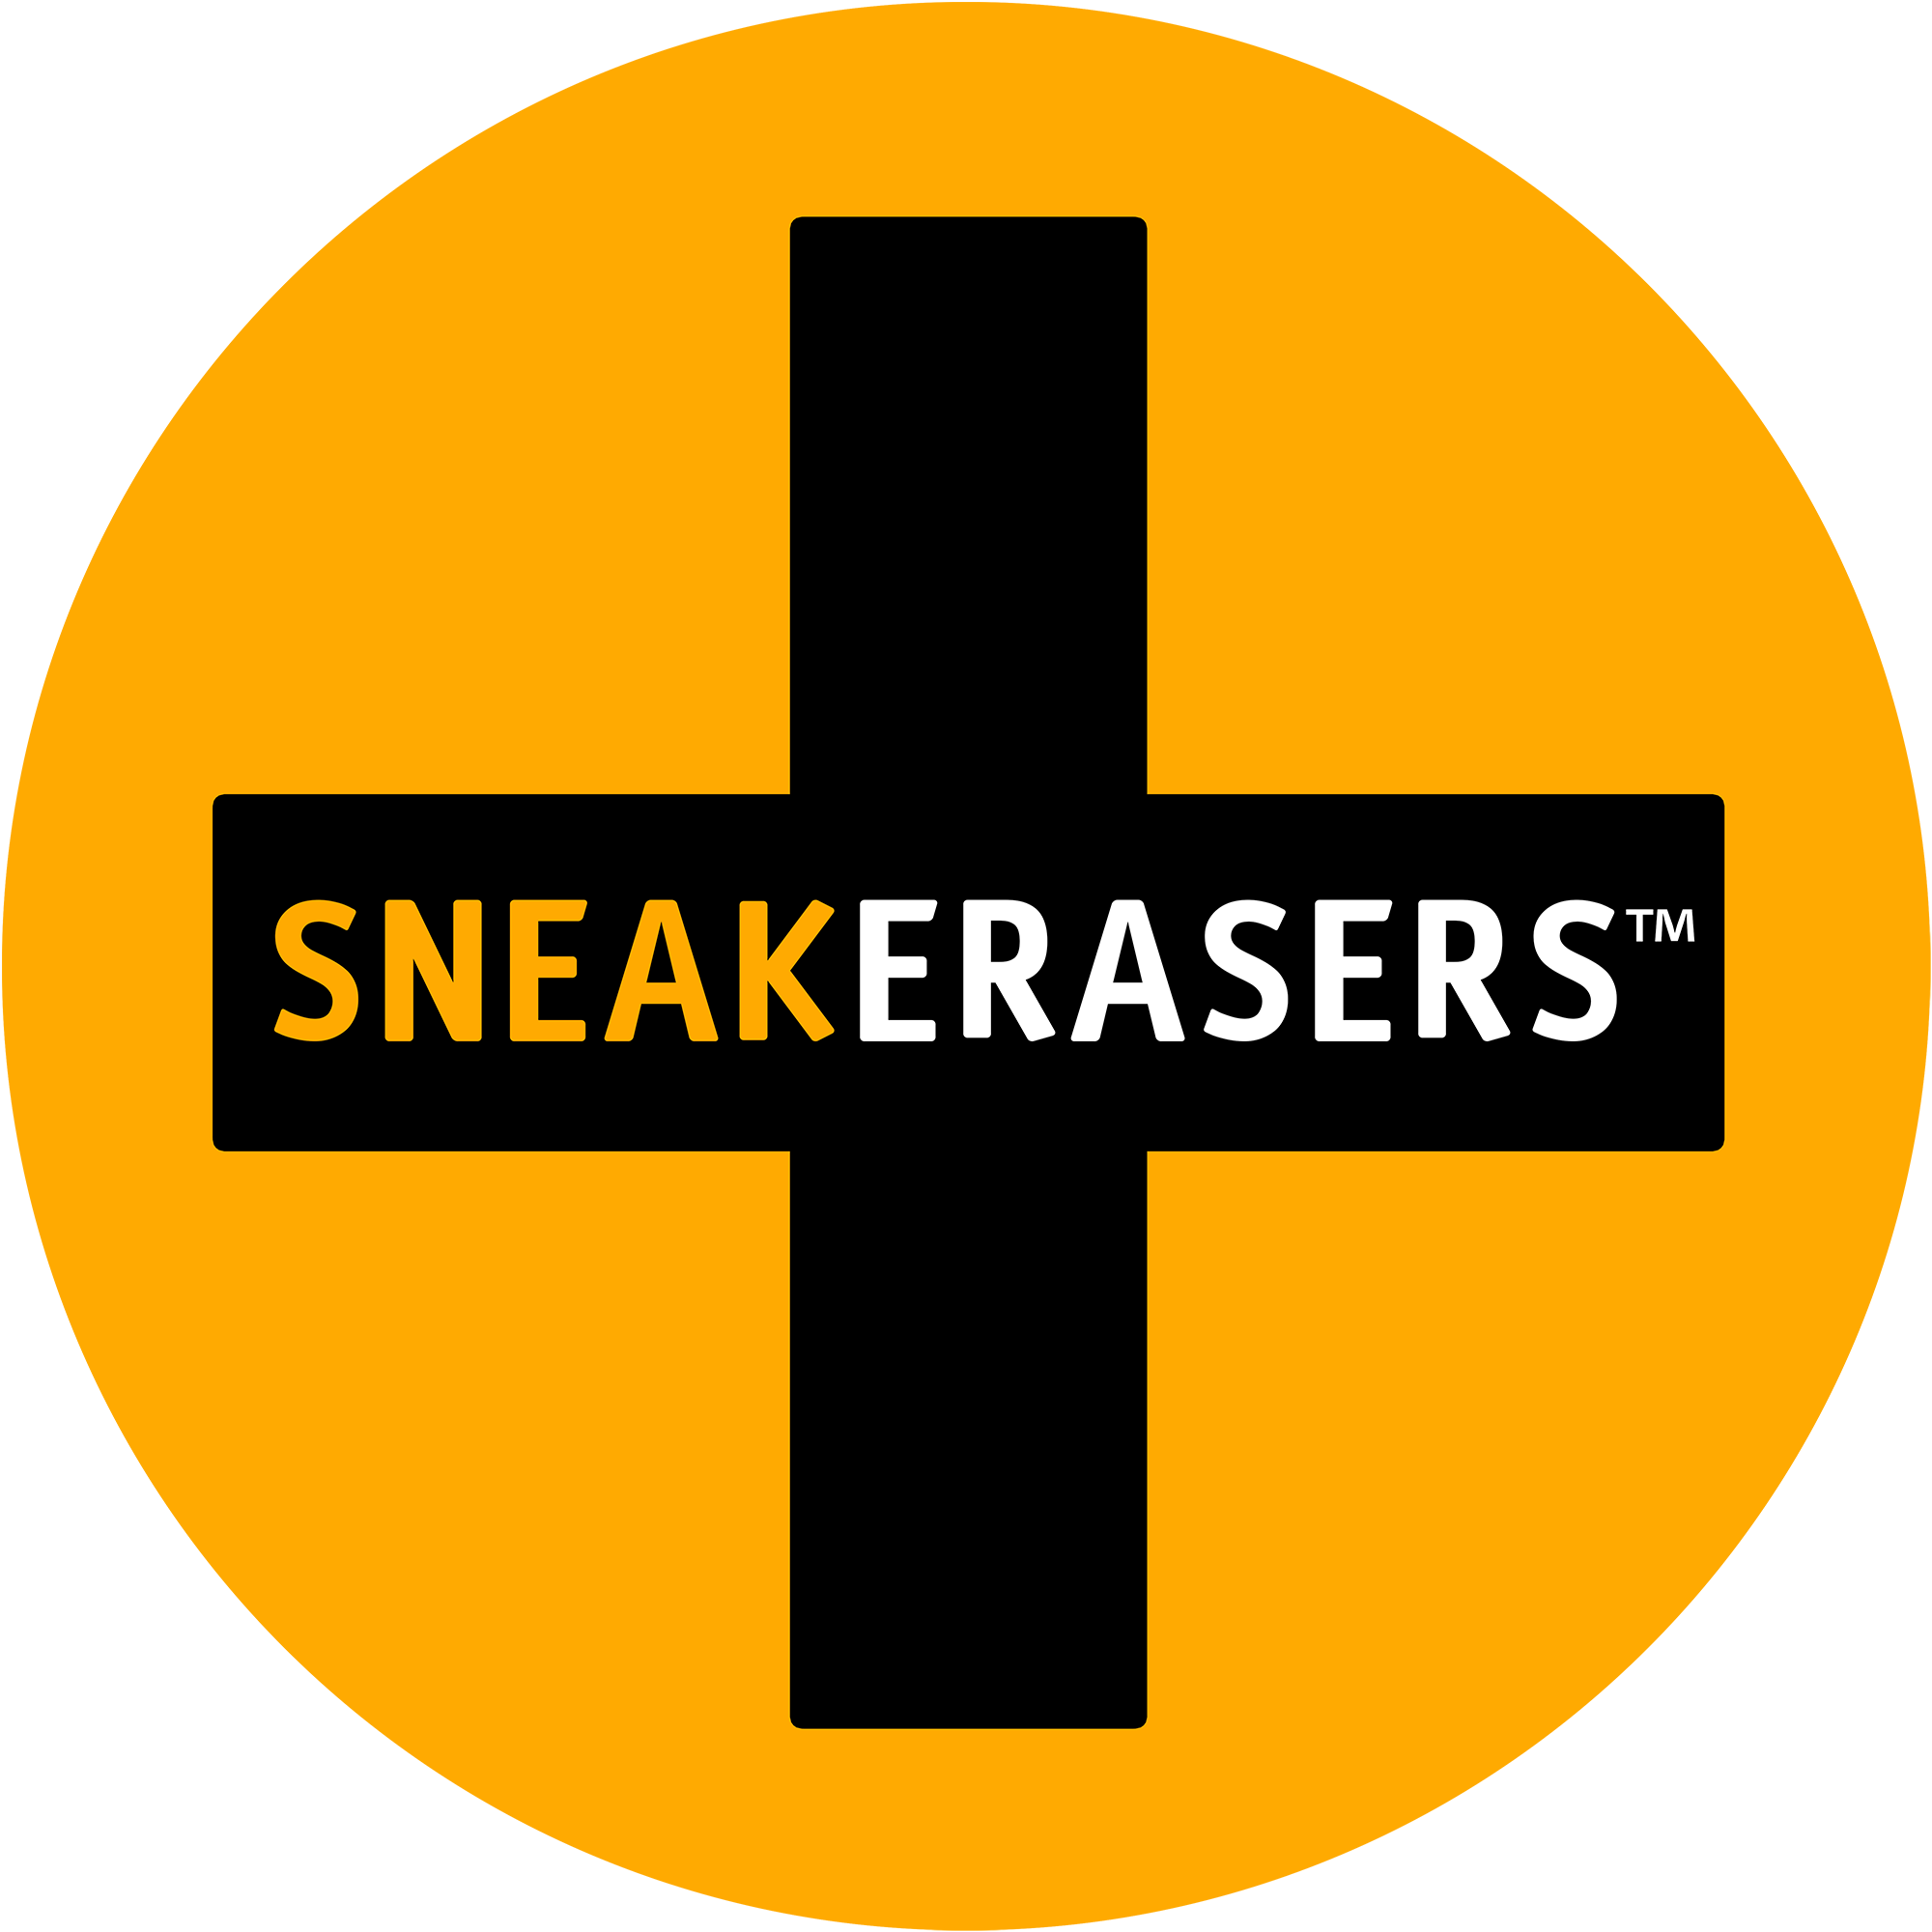 SneakERASERS